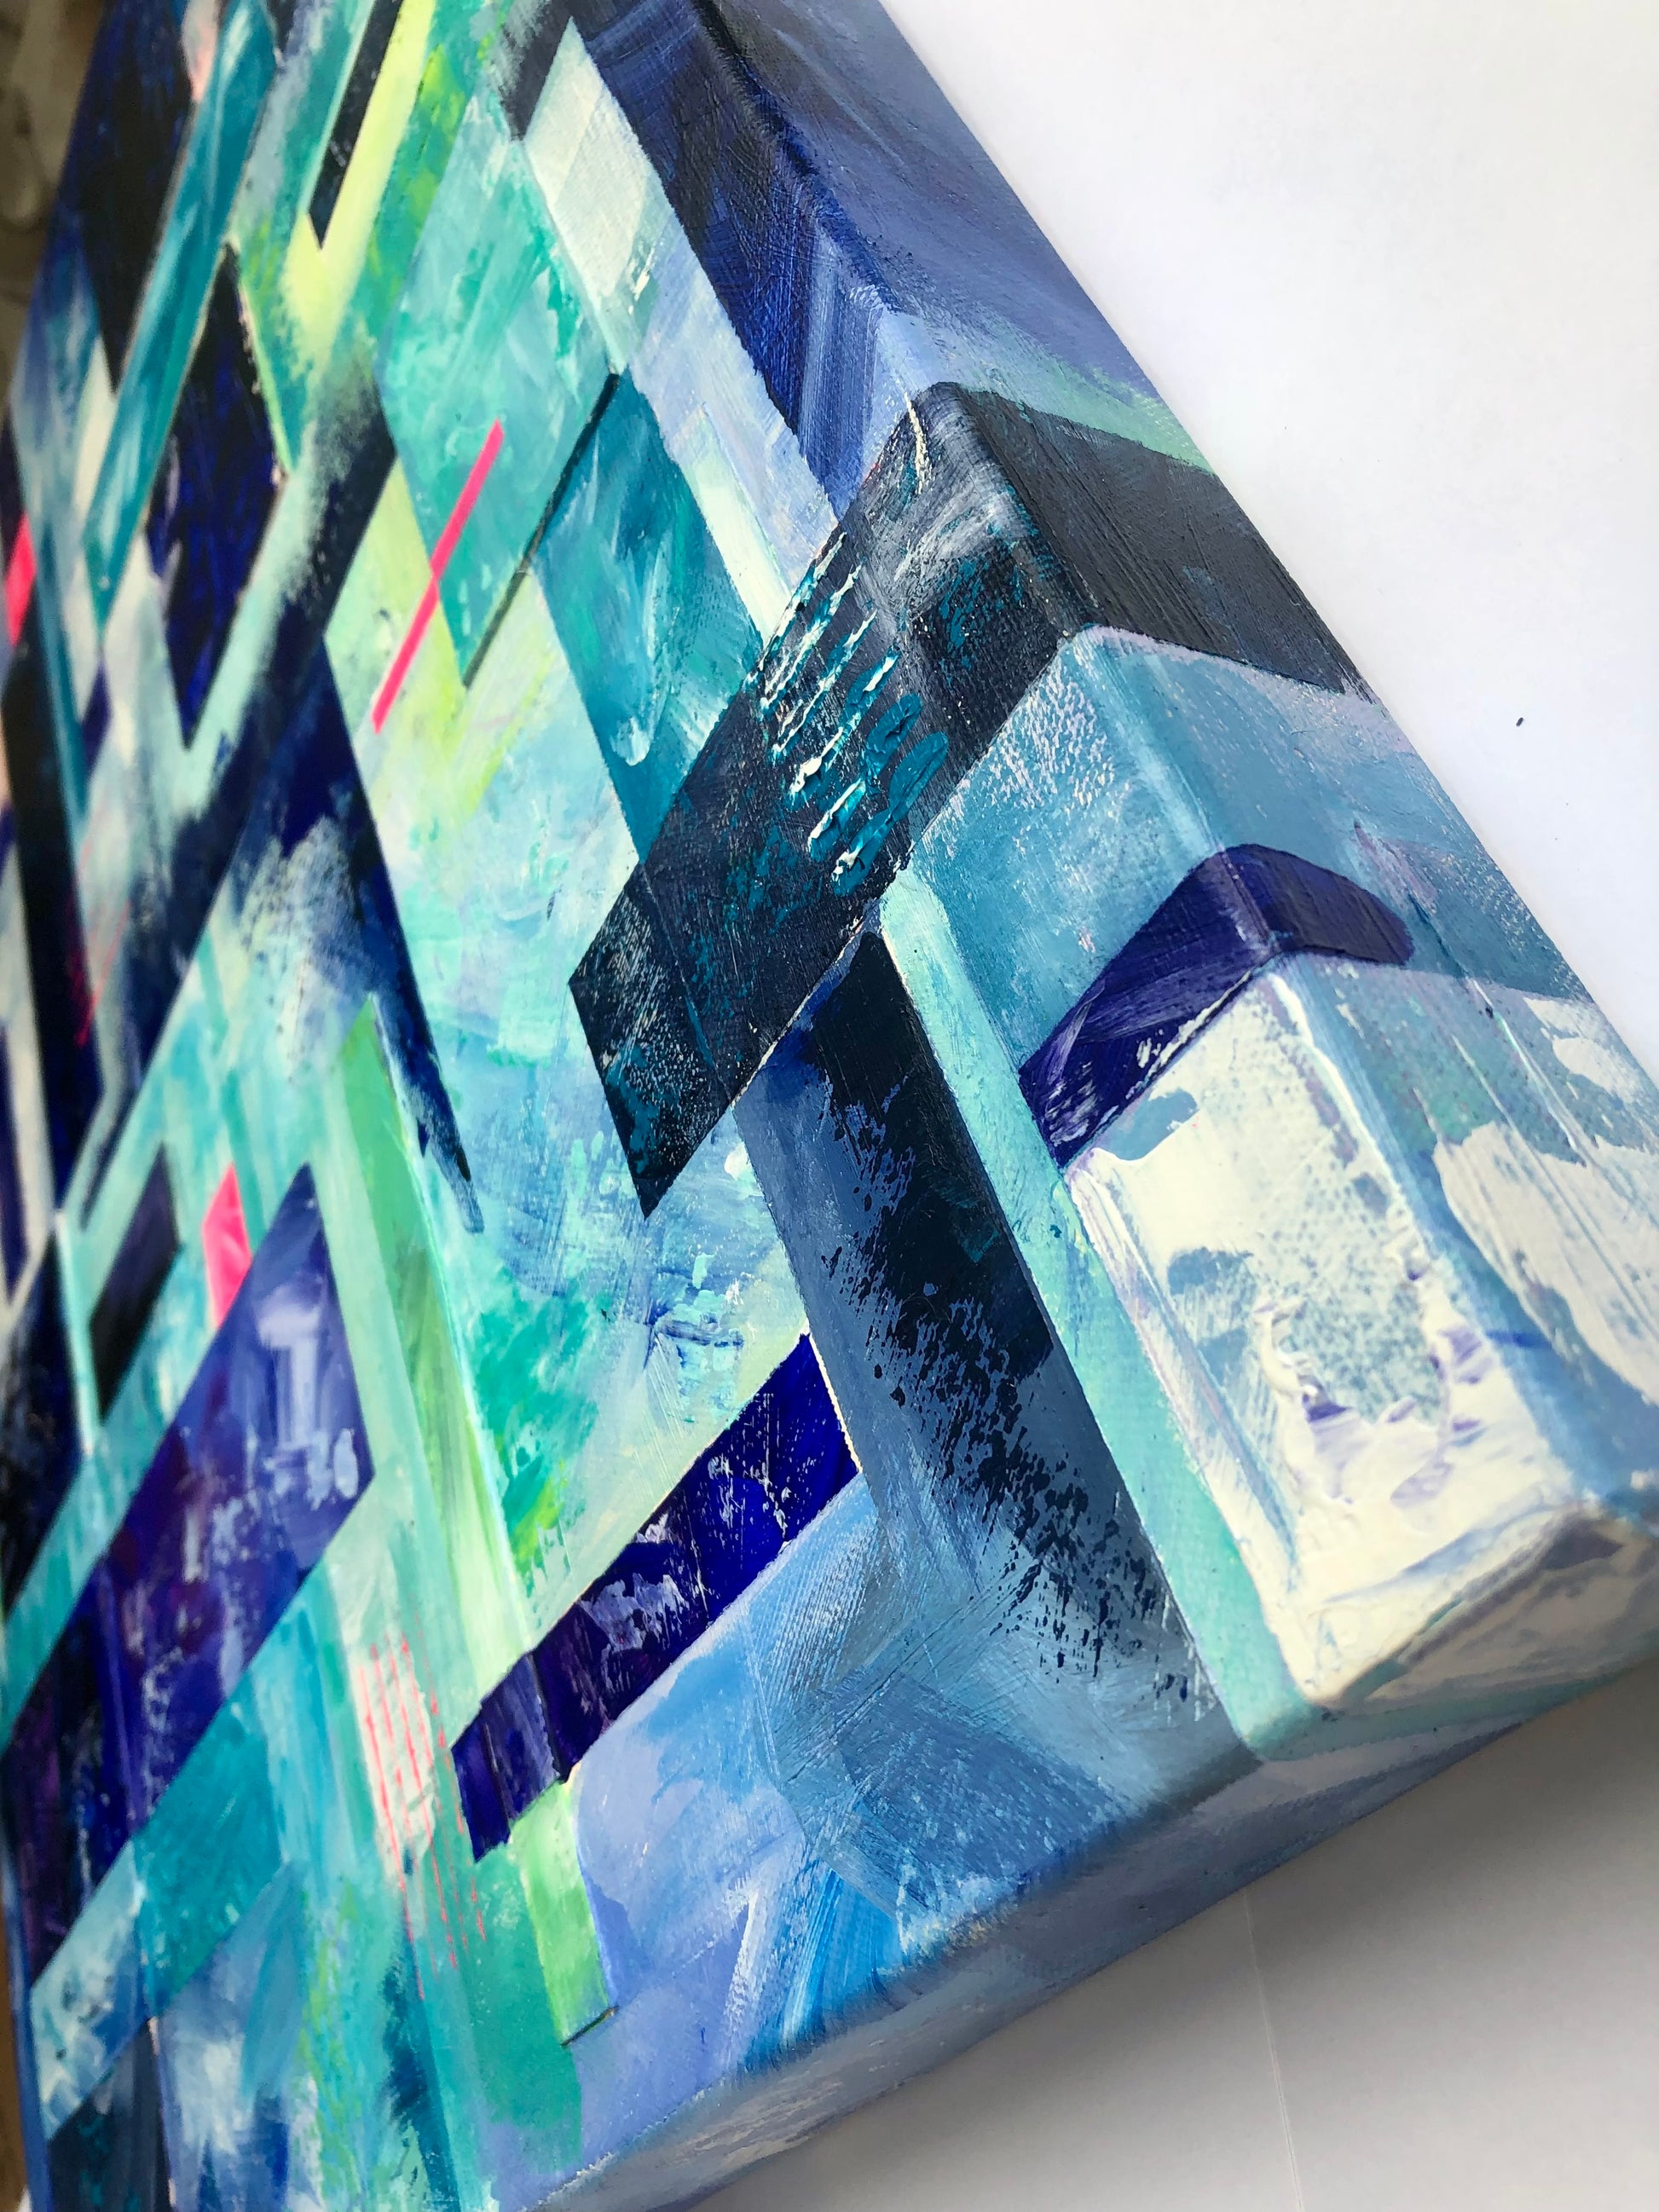 Elemental Series in Oil and Cold Wax –  visual